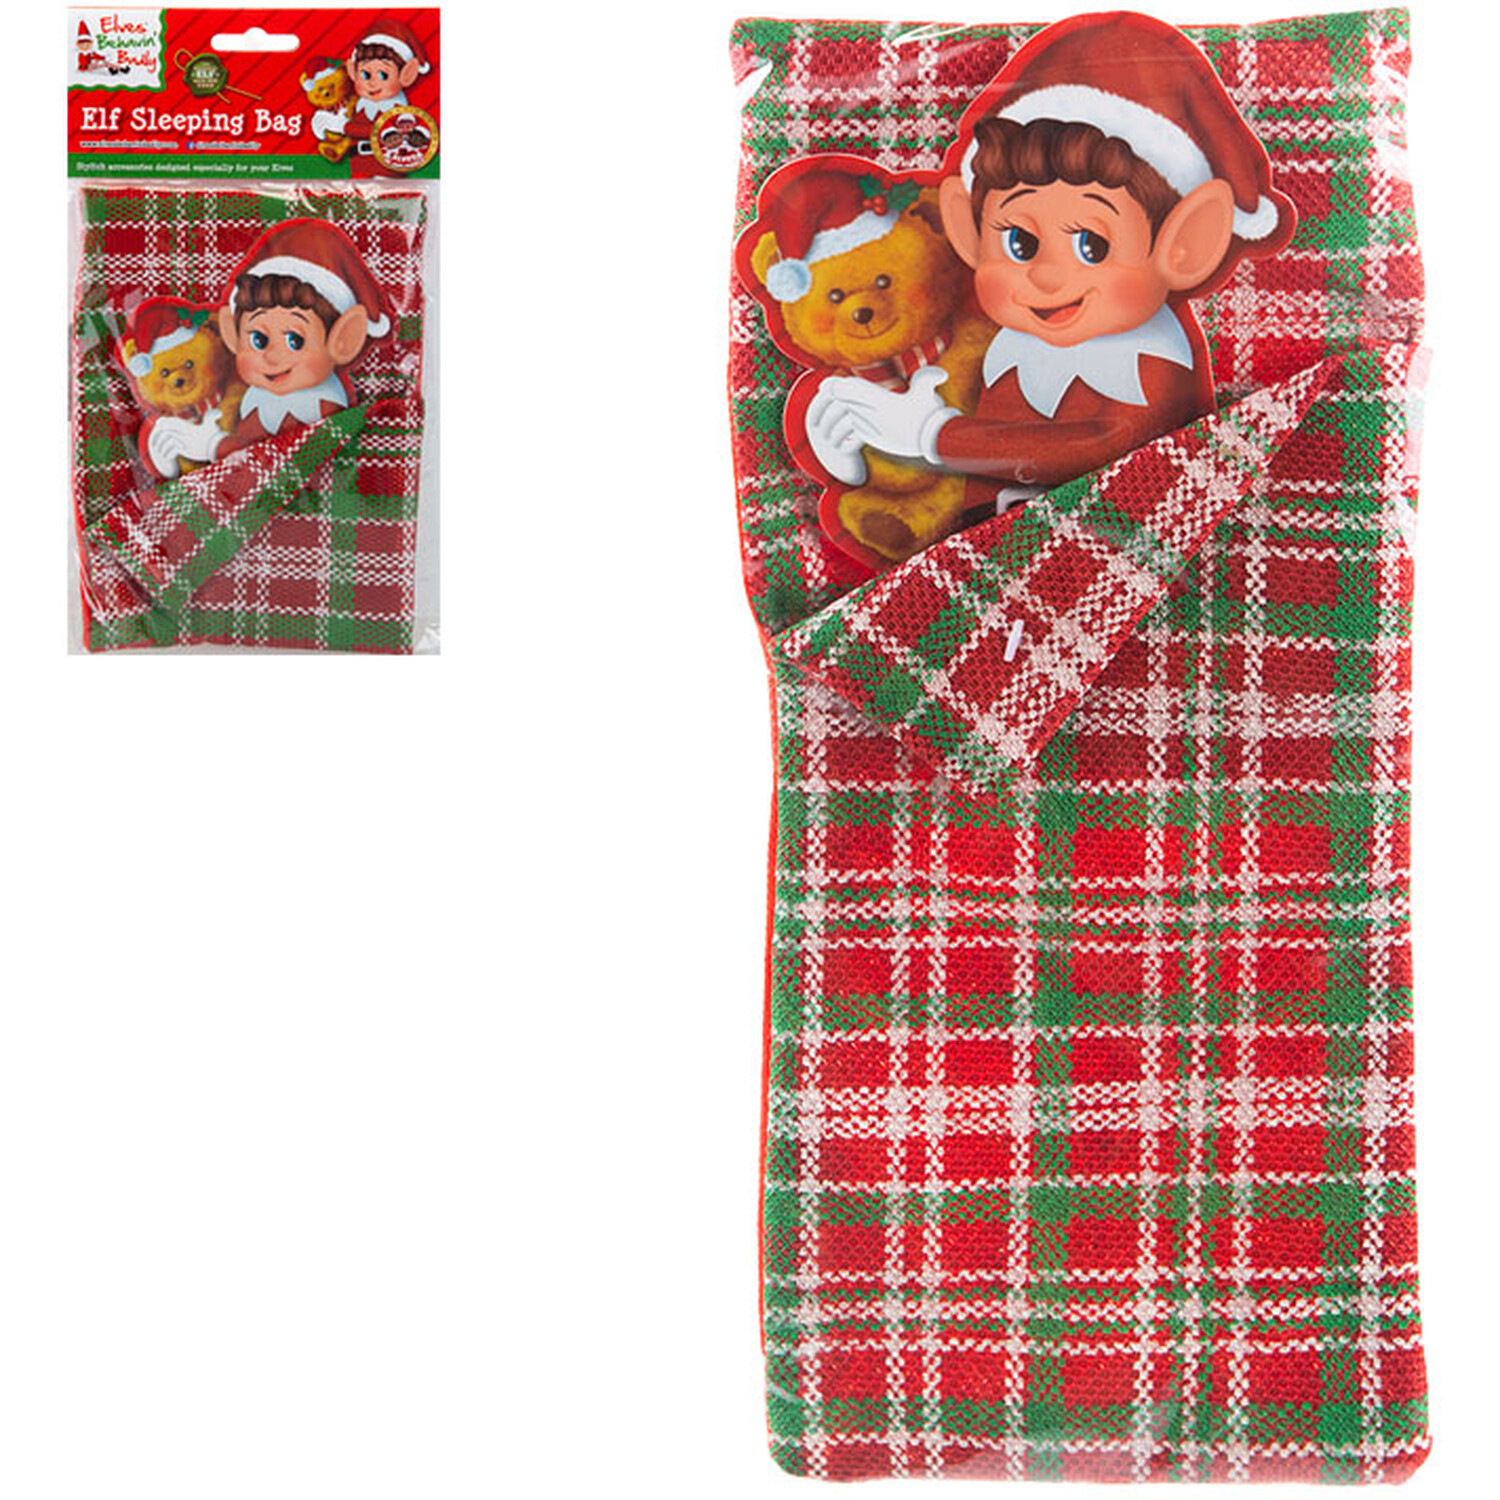 Patterned Elf Sleeping Bag and Pillow Image